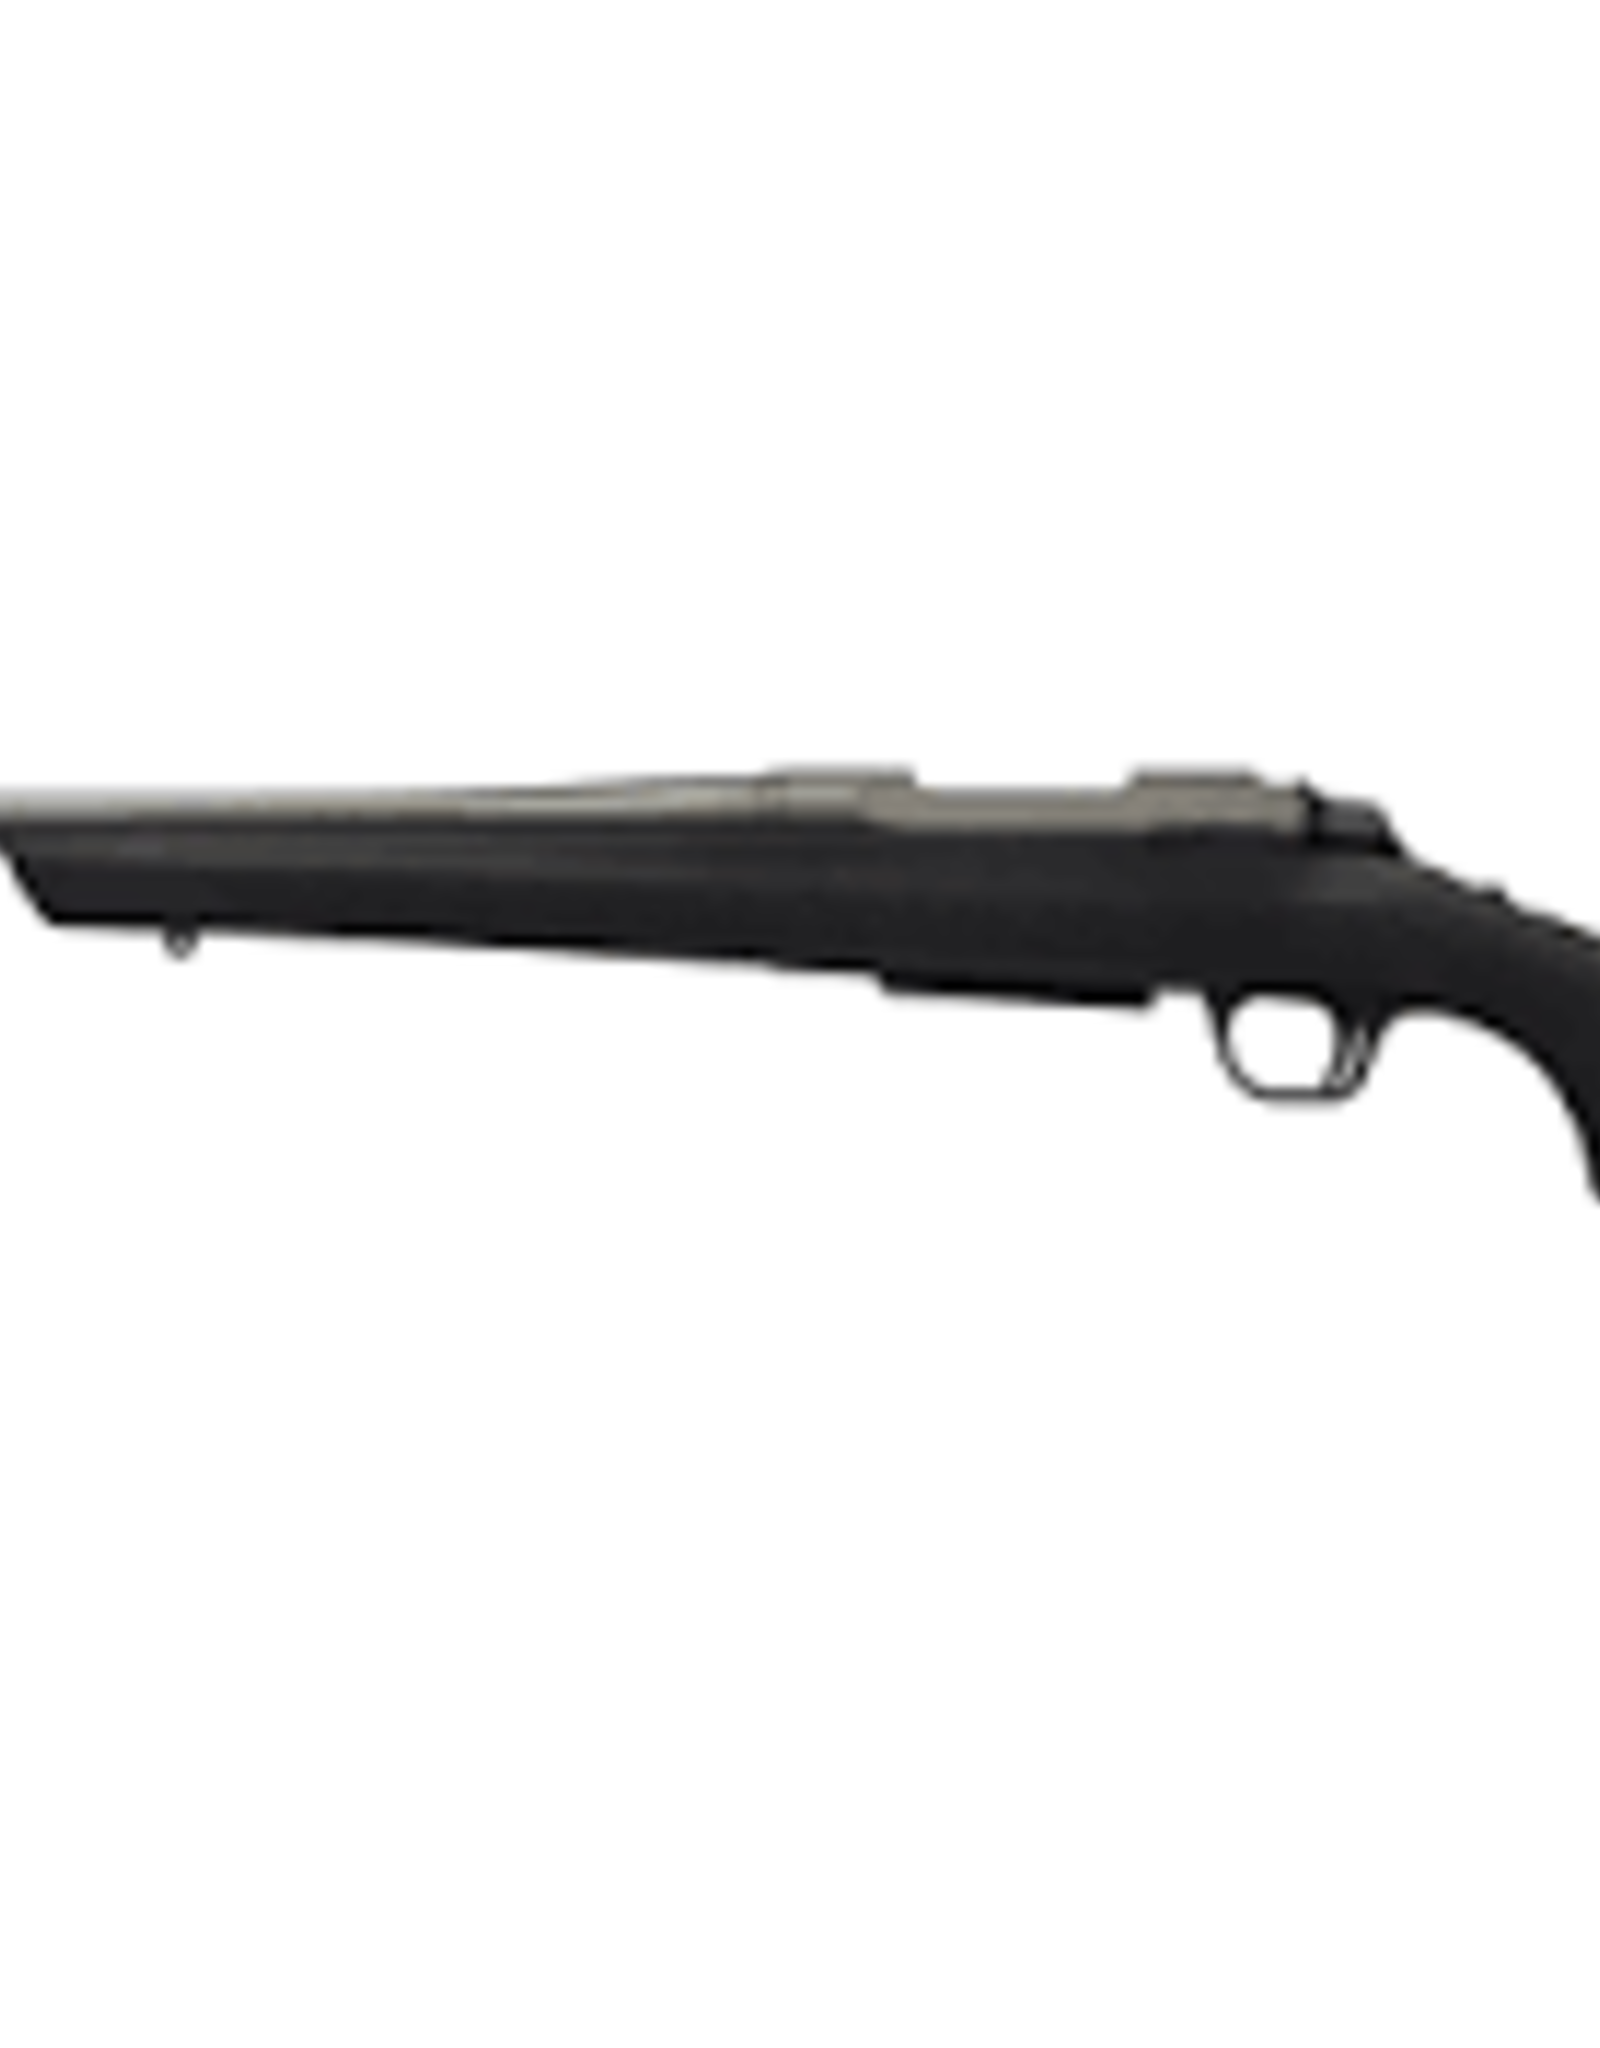 Browning AB3 Micro Stalker Bolt Action Rifle RH